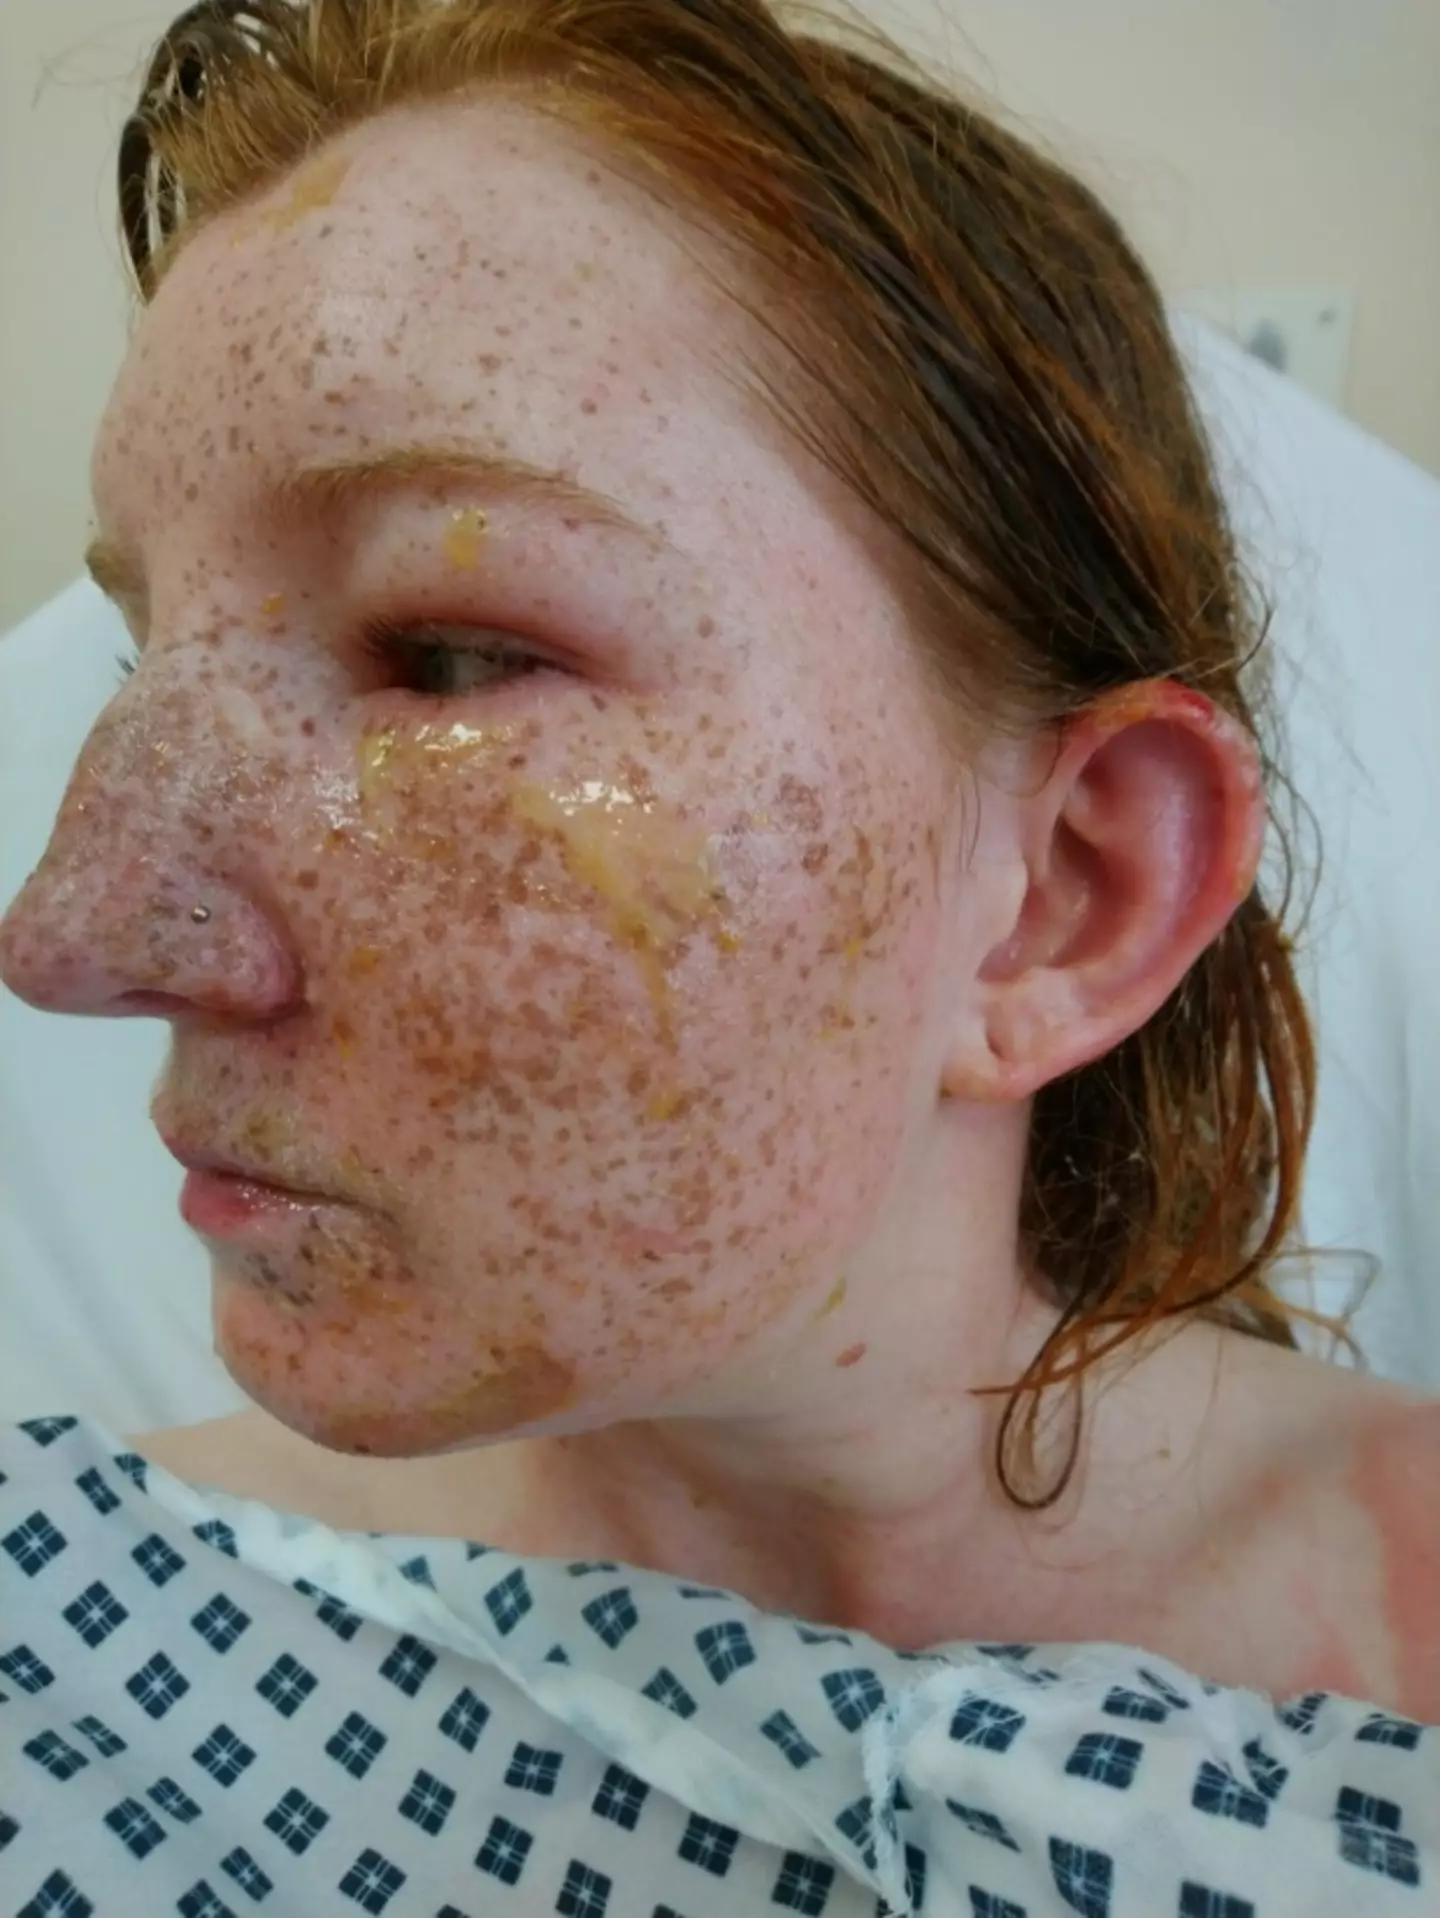 Her freckles gradually 'died' and fell off.